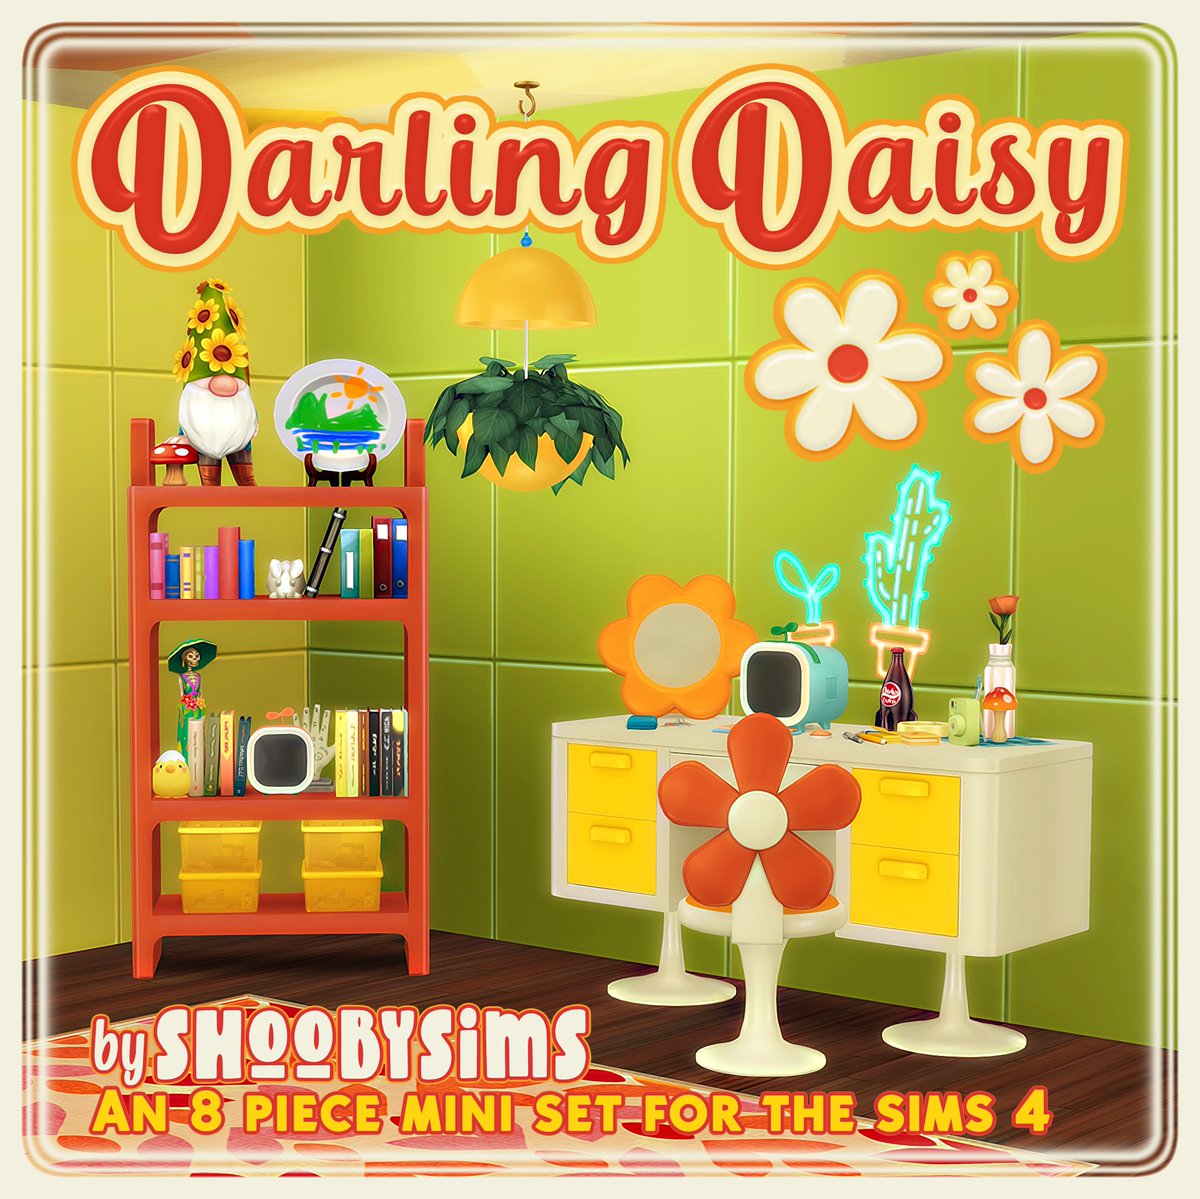 Darling Daisy CC Set
Live your plastic flower power dreams.

details here: shoobysims.com/post/748704437… #ts4cc